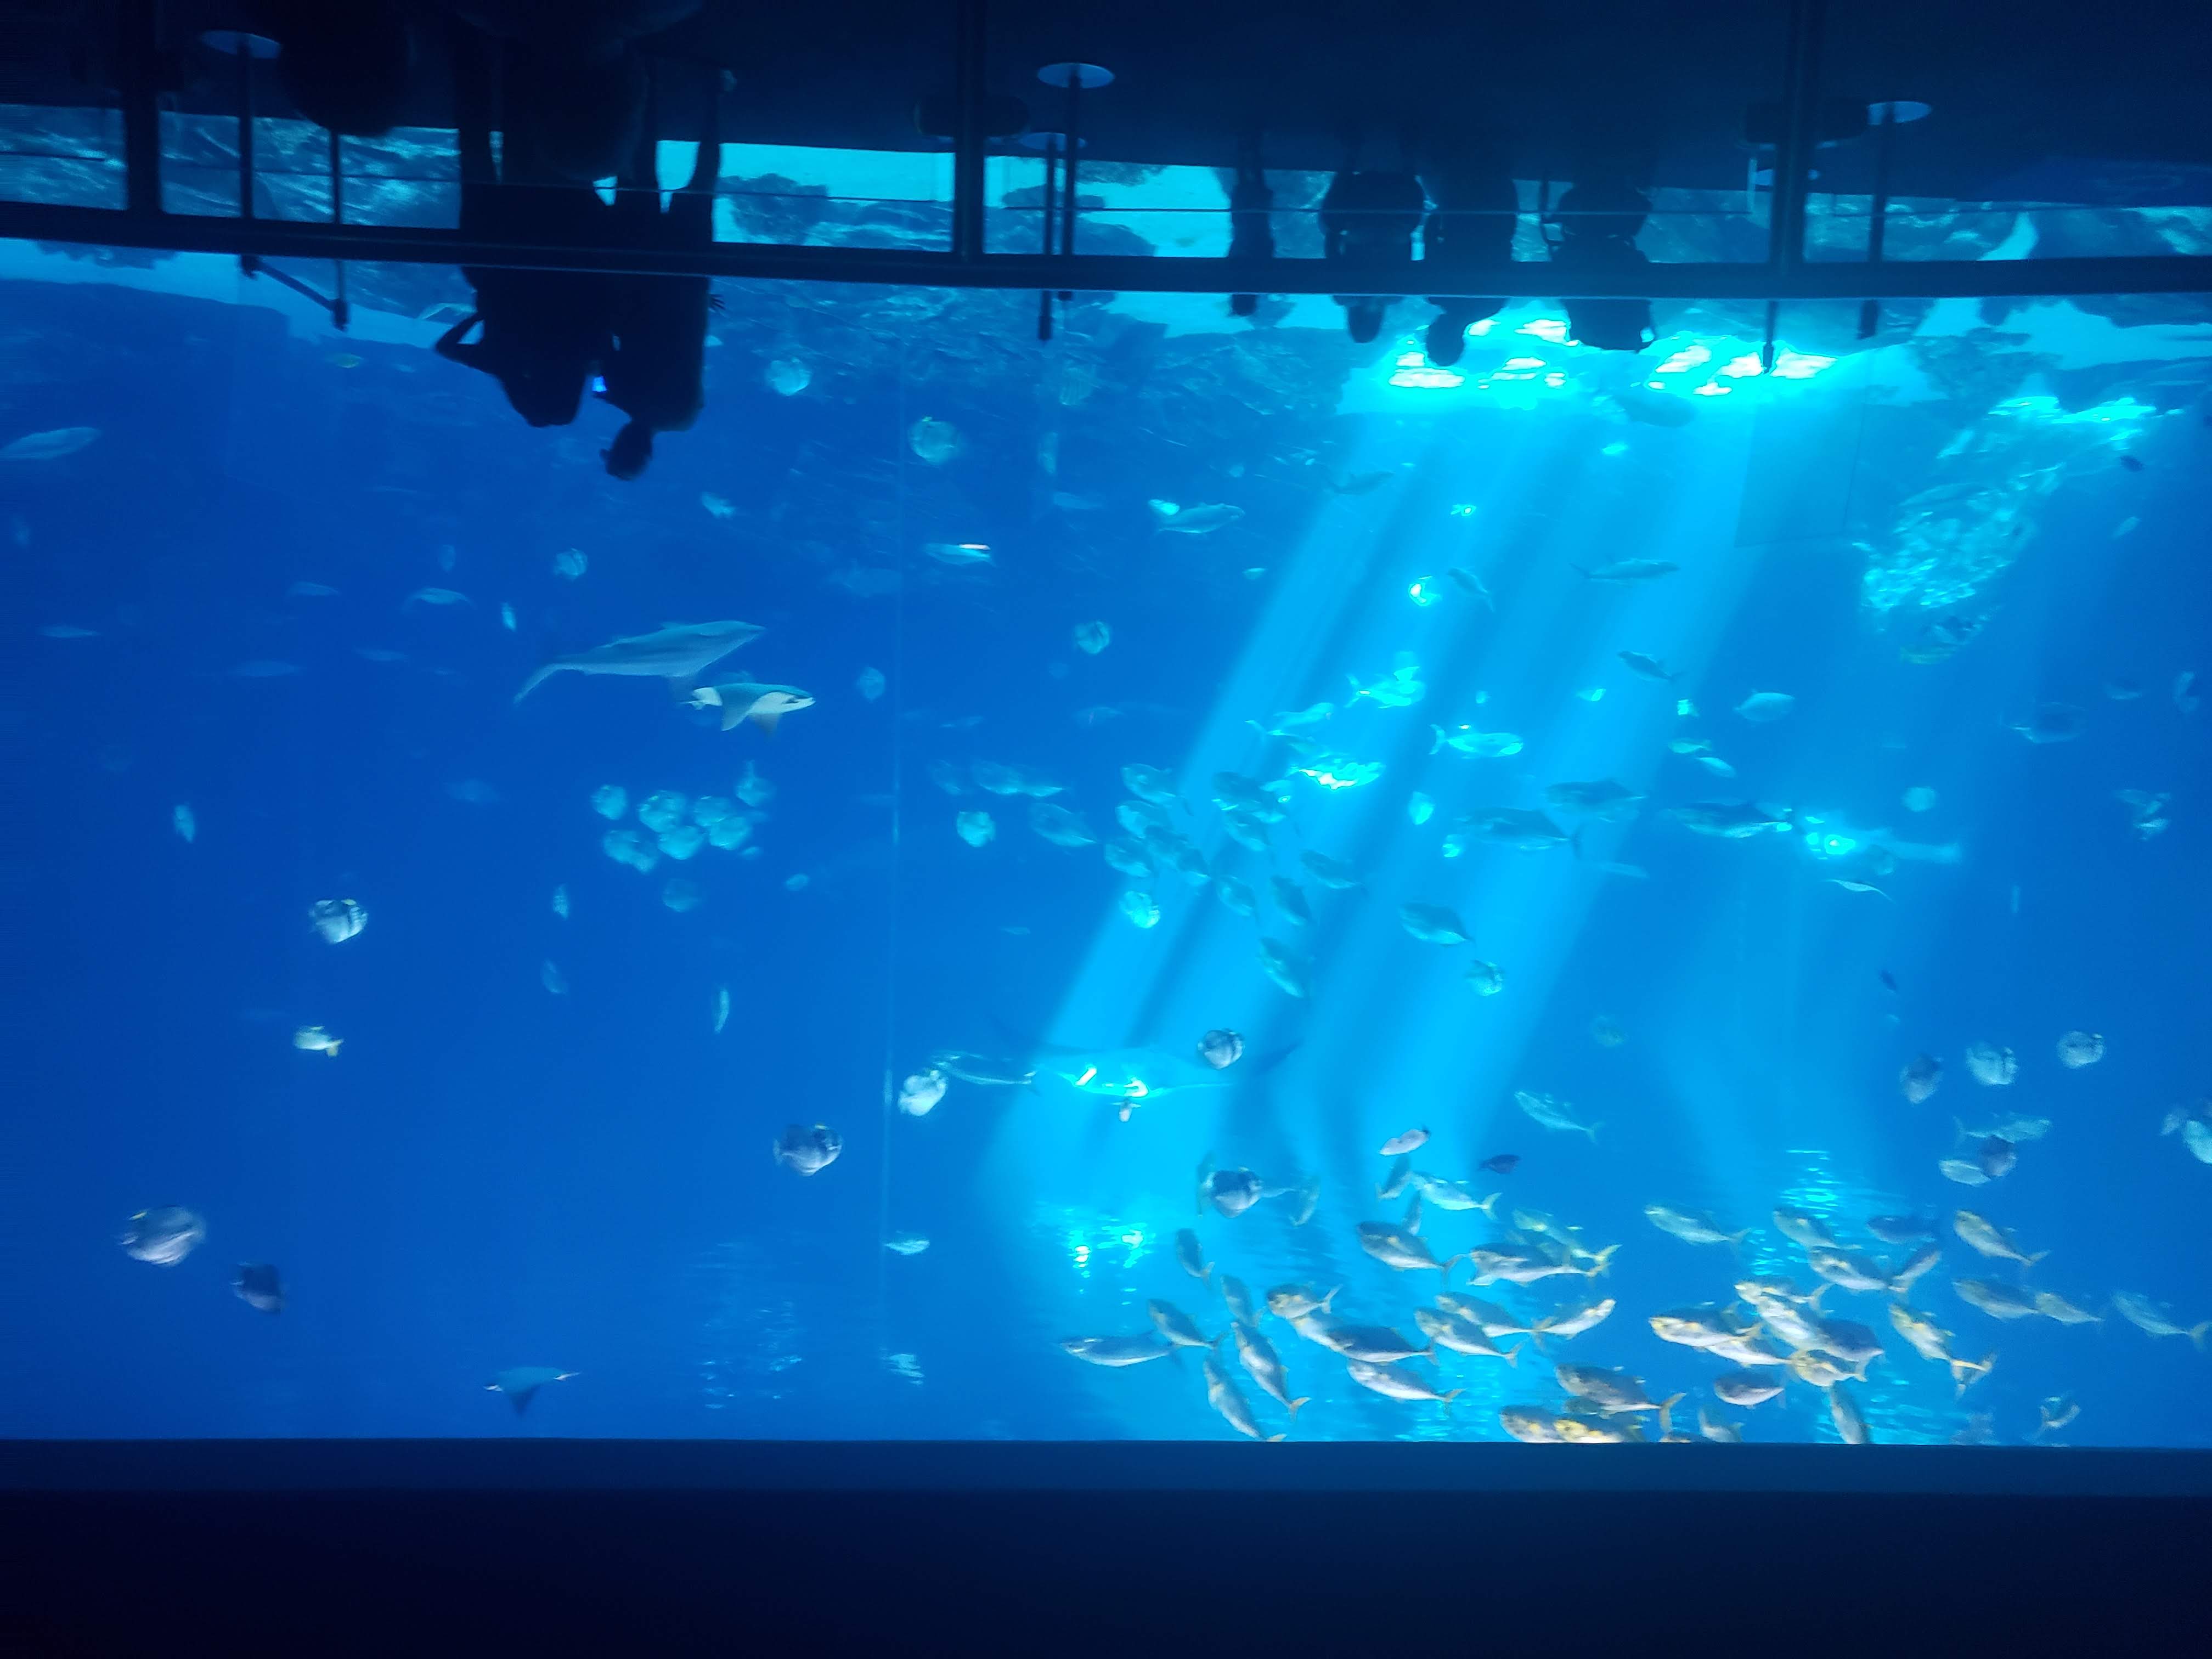 Silhouettes of people looking at a massive aquarium tank filled with fish